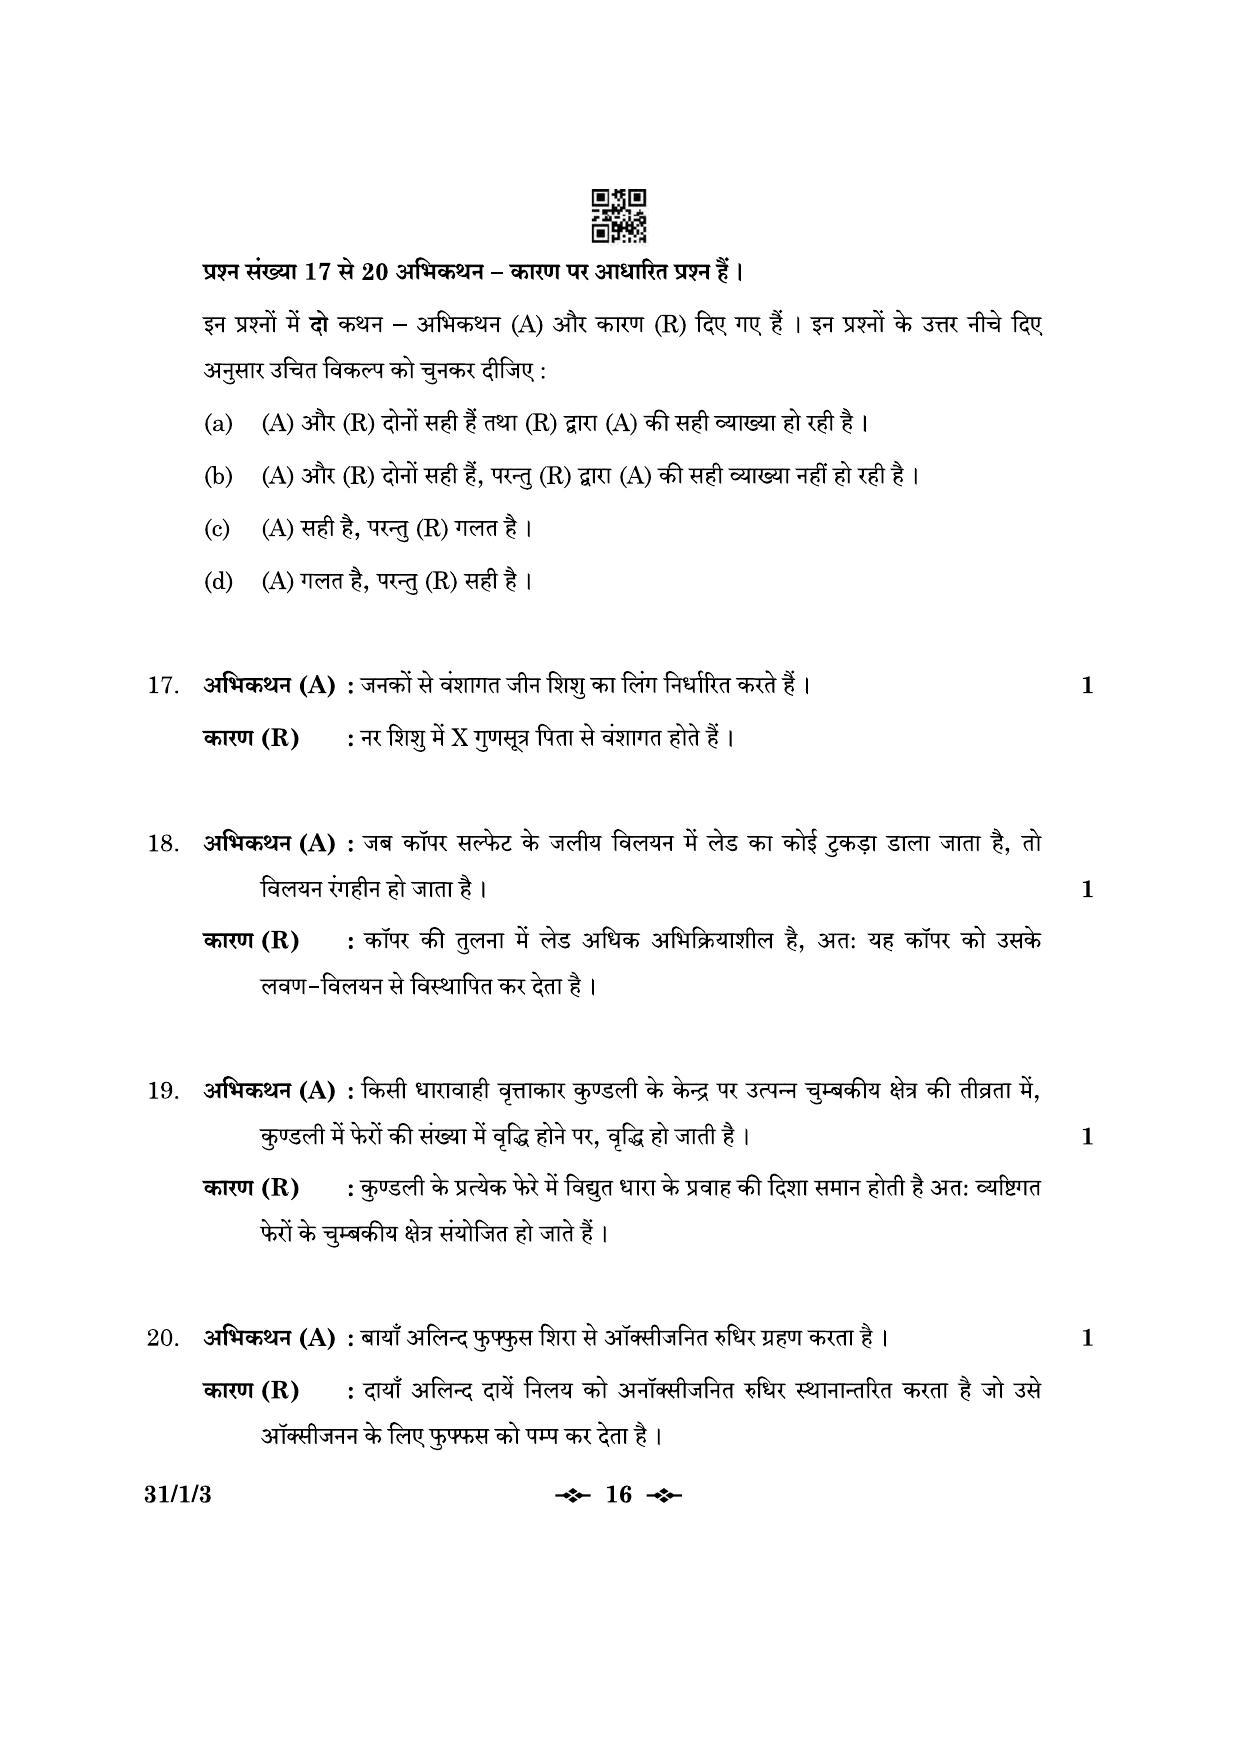 CBSE Class 10 31-1-3 Science 2023 Question Paper - Page 16